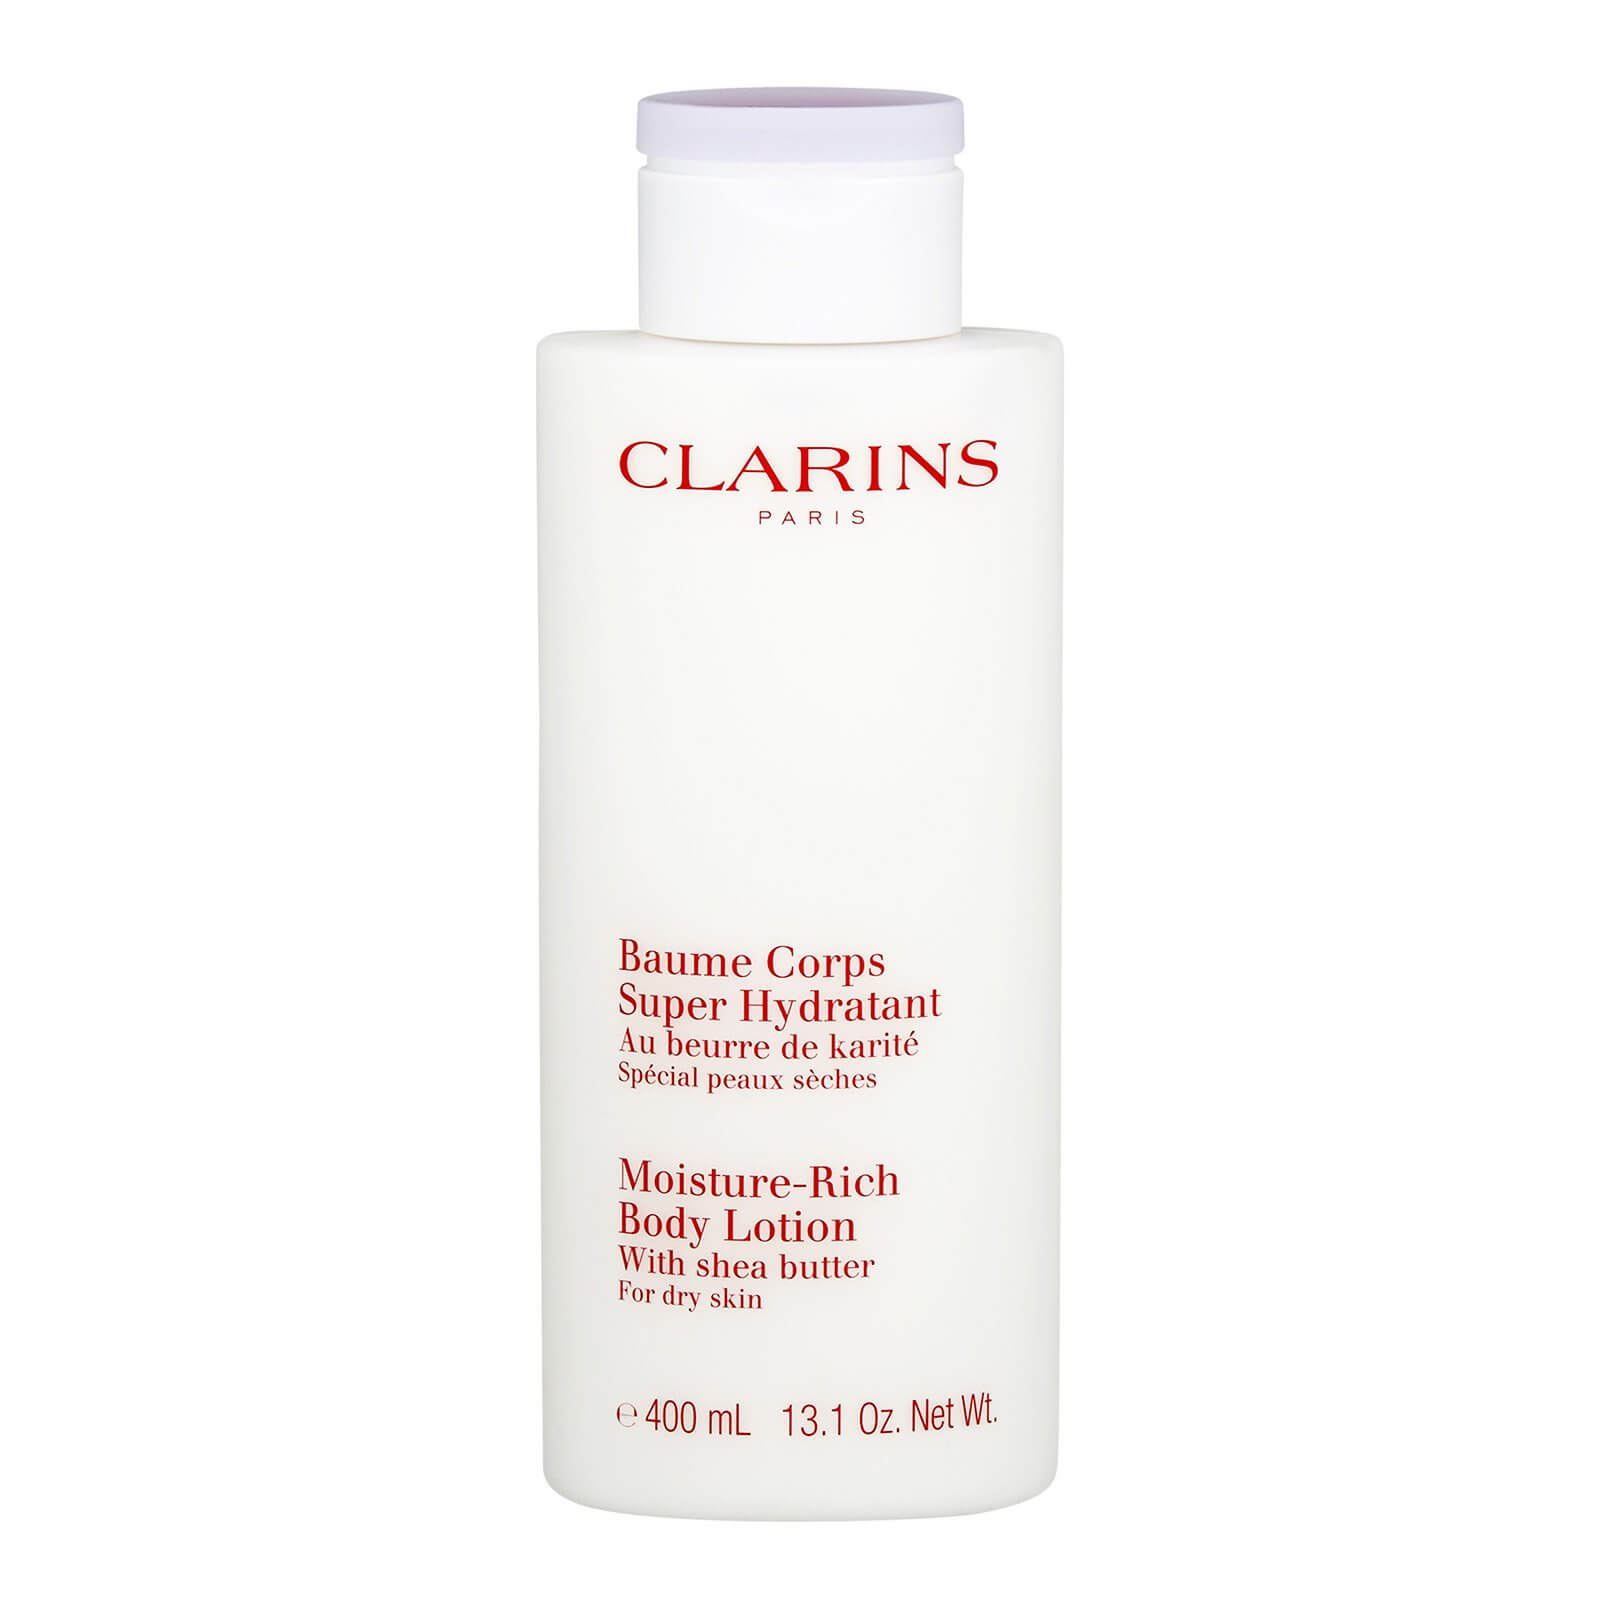 Moisture-Rich Body Lotion (For Dry Skin)